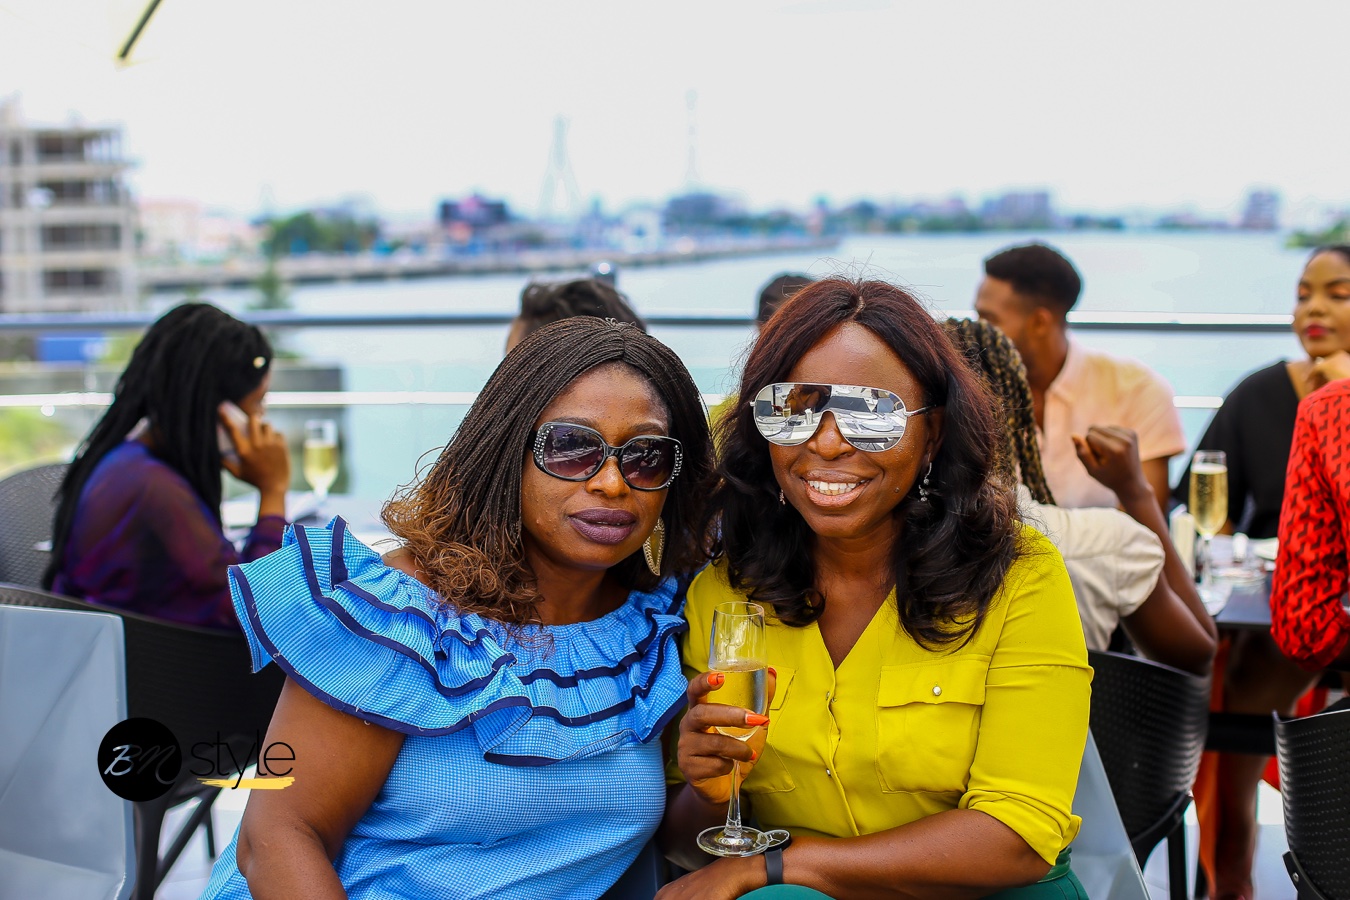 All The Fun & Fab Moments At The ARISE Fashion Week 2019 Exclusive Press Brunch